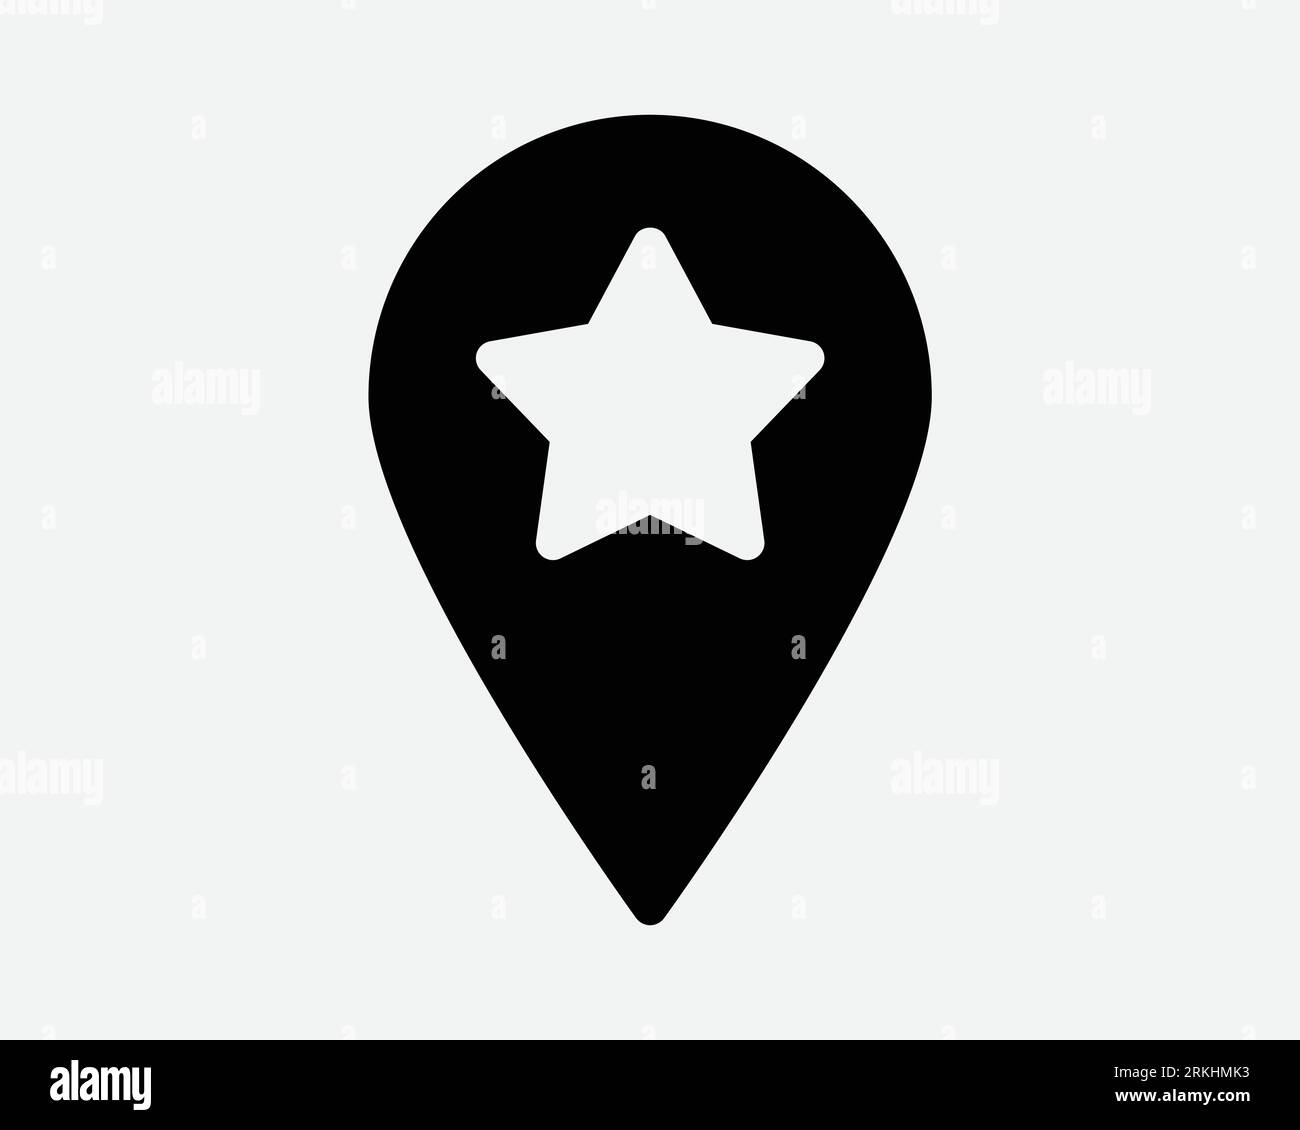 Location Pin Star Icon Favourite Saved Place Destination Map GPS Navigation Direction Position Travel Trip Point Mark Button Black Vector Symbol Sign Stock Vector